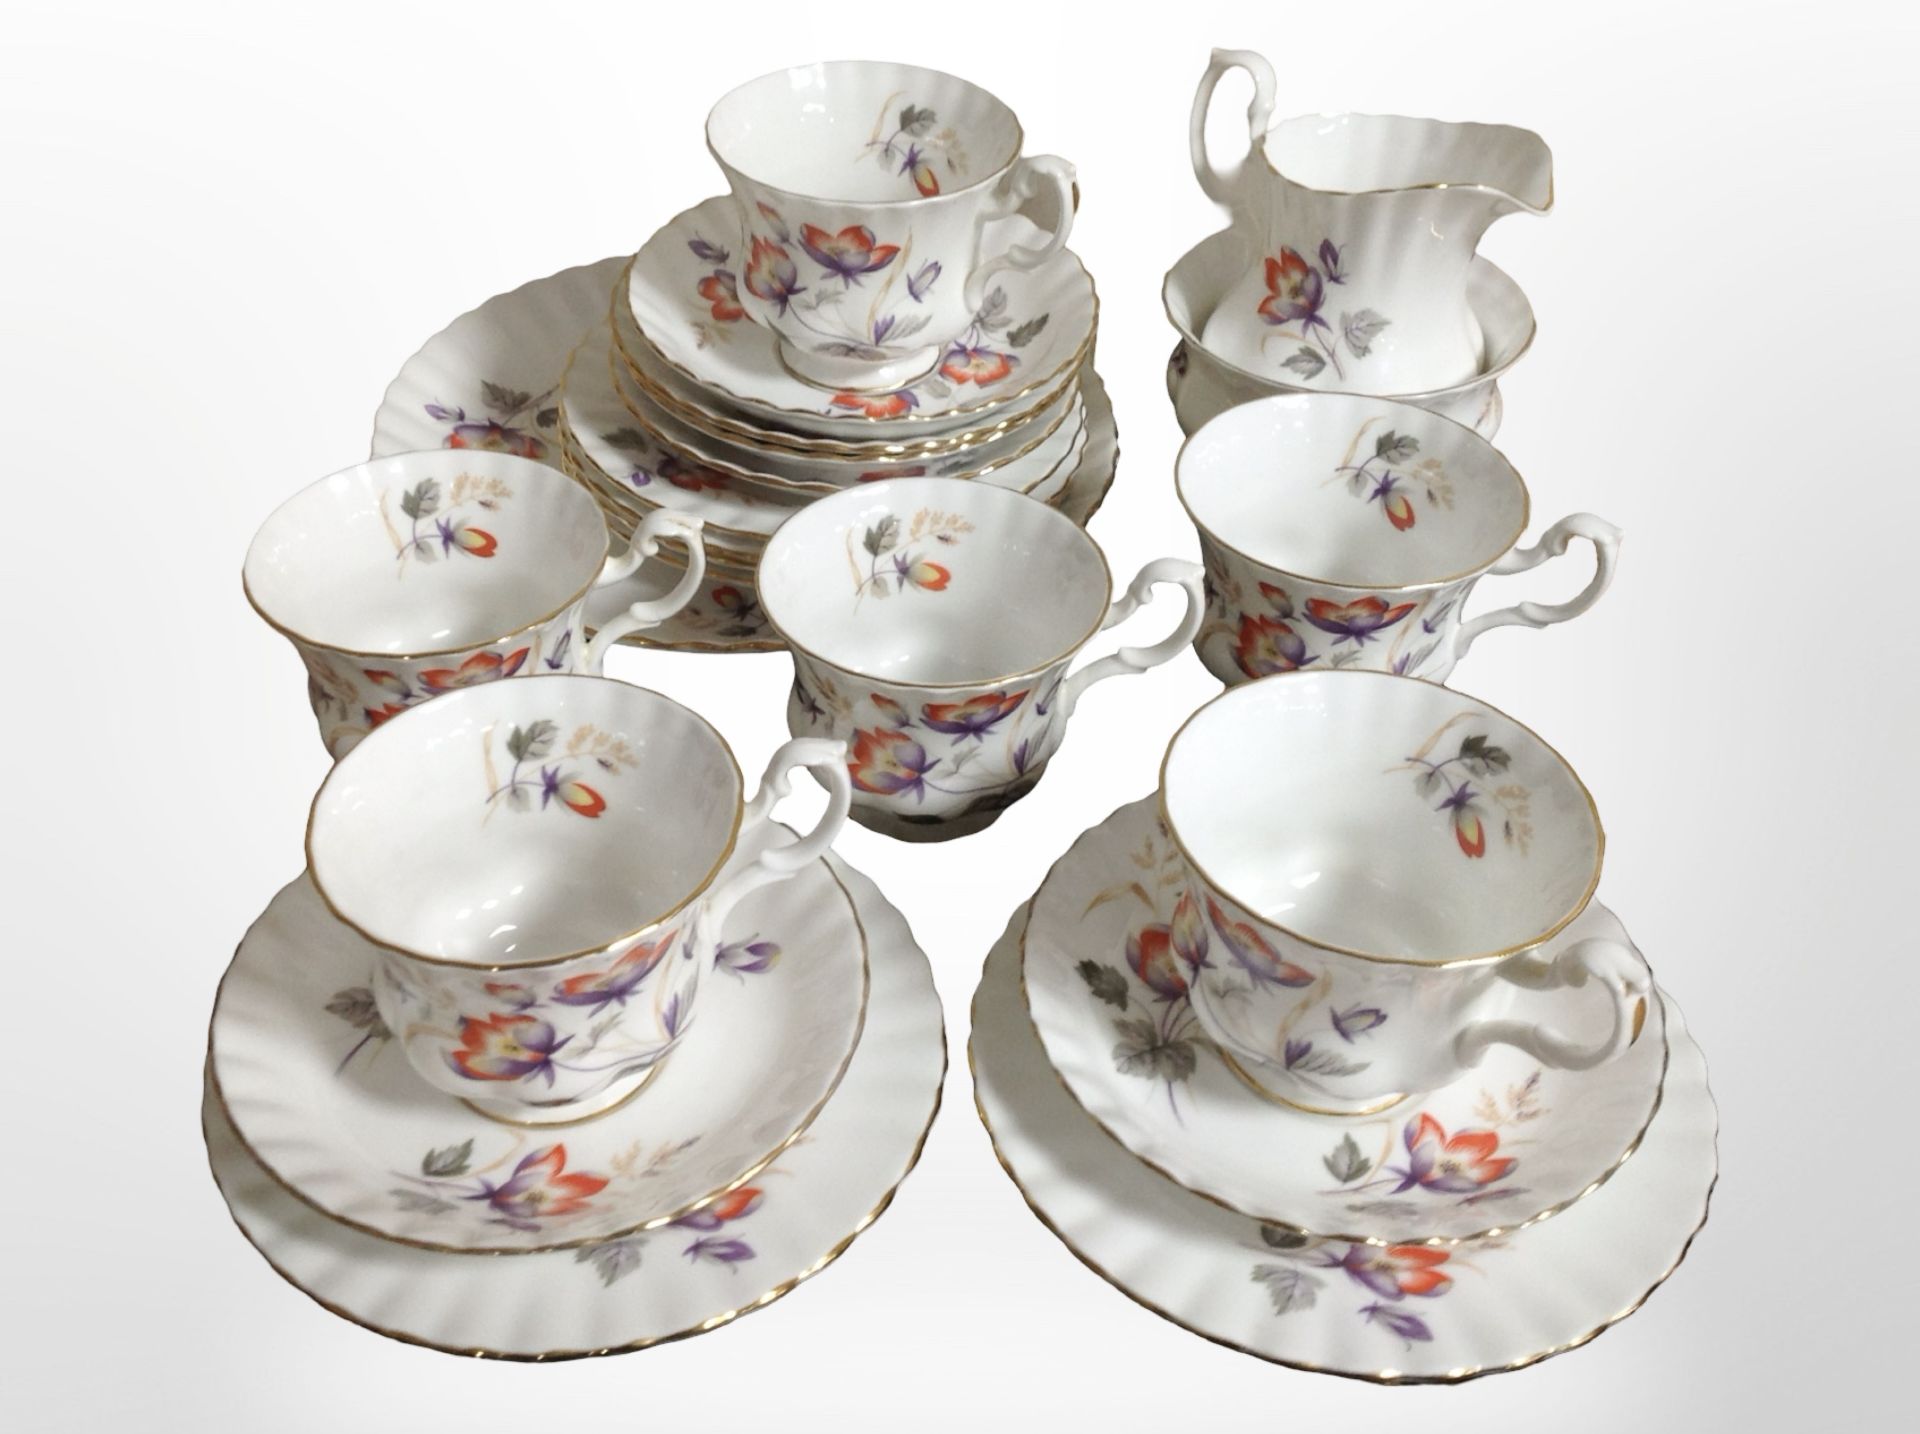 21 pieces of Royal Albert tea china decorated with floral sprays,